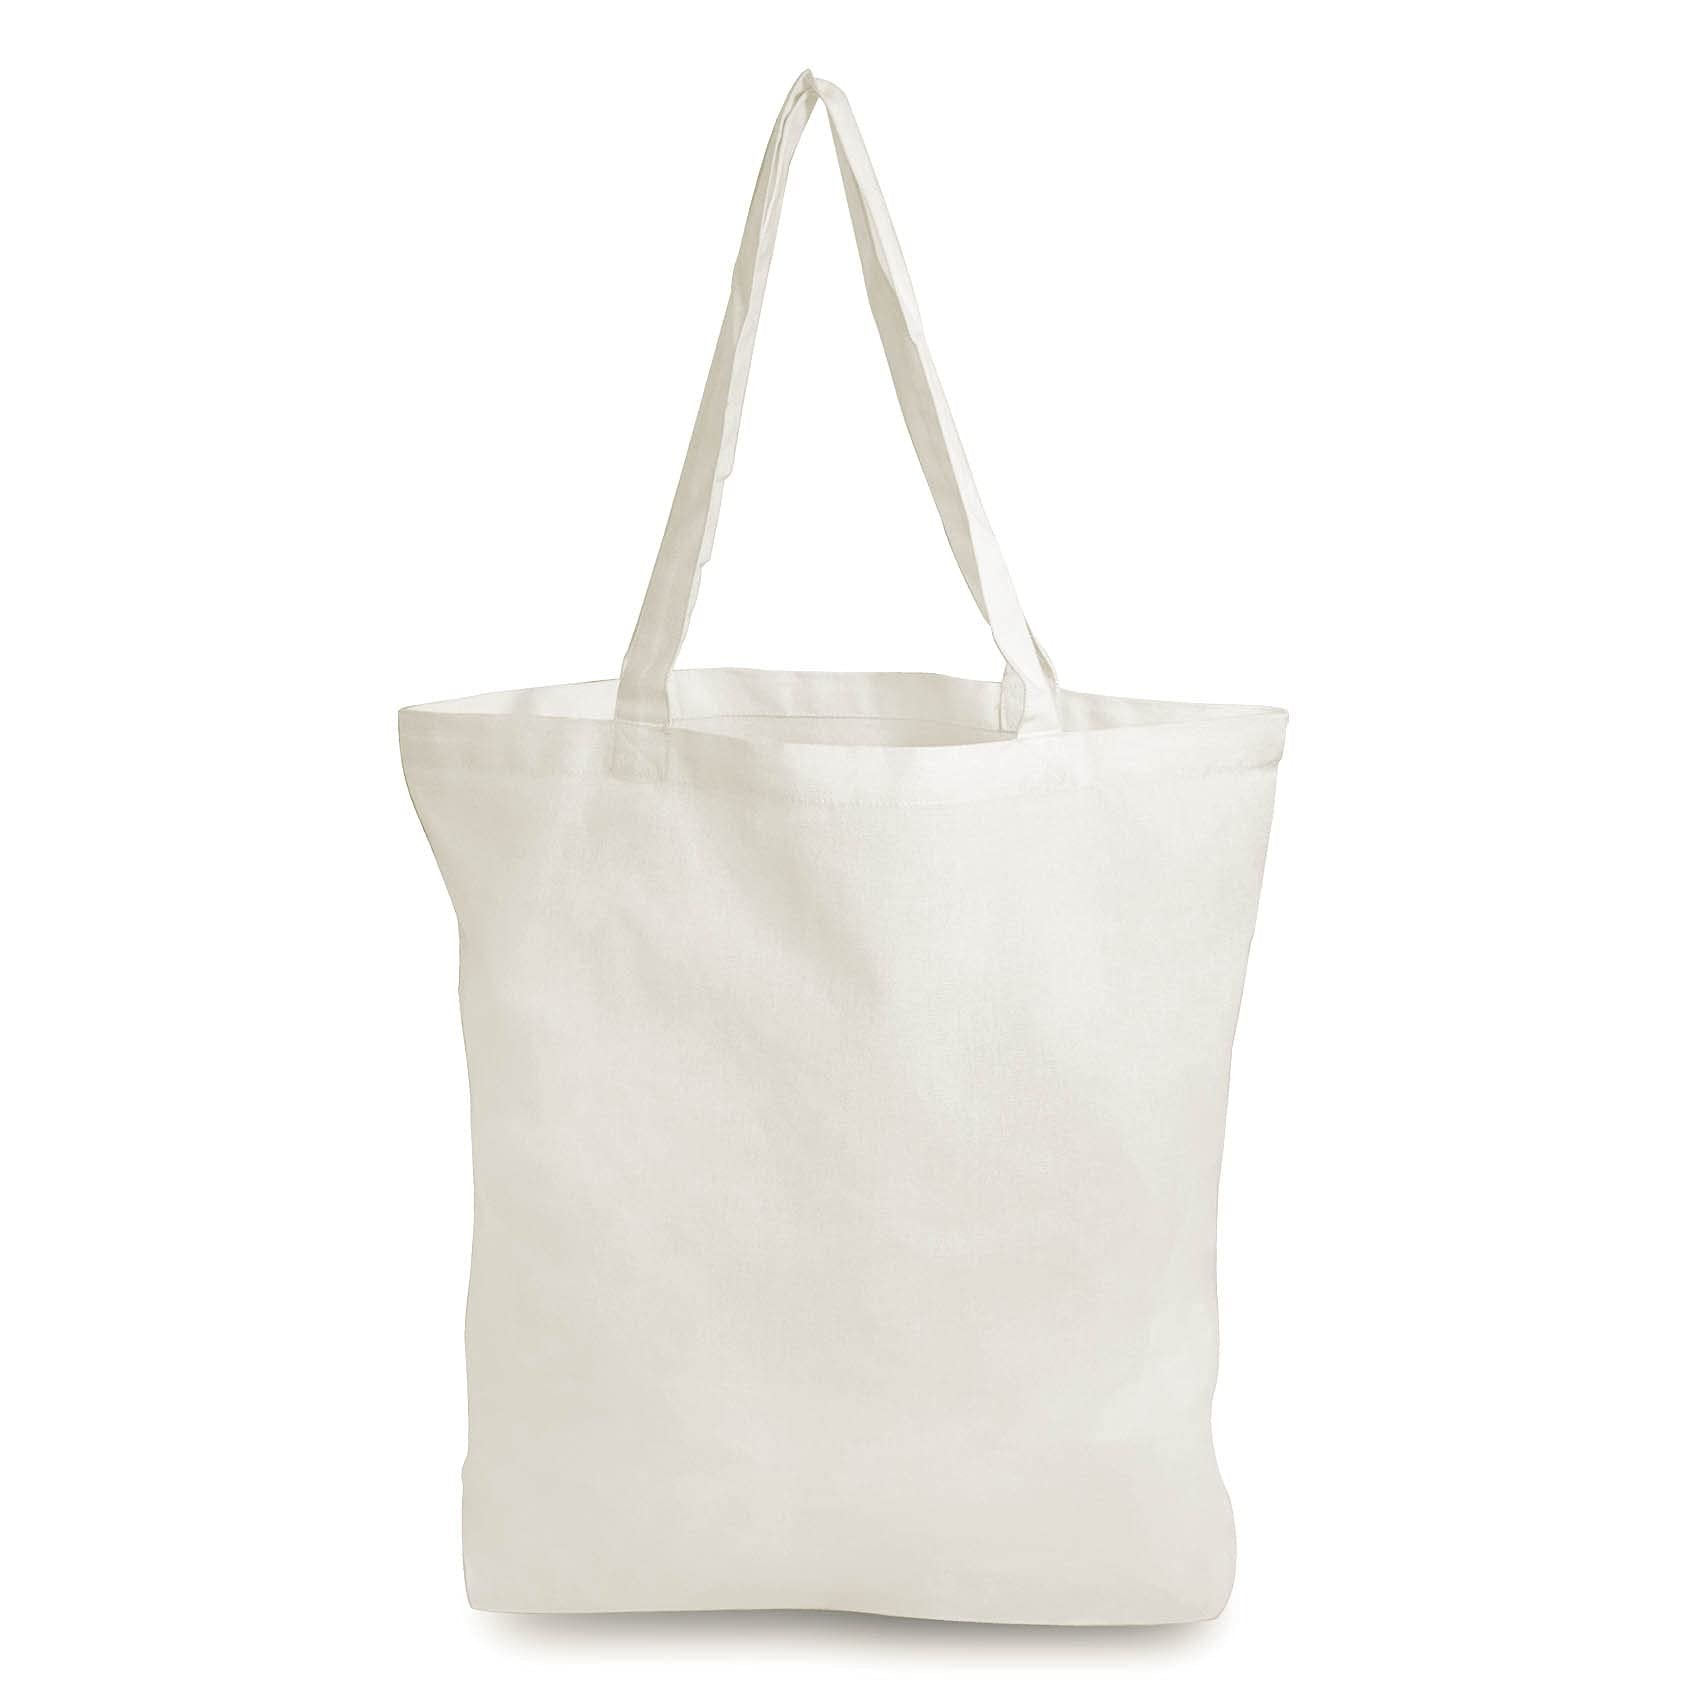 Canvas Bags with Handles - Plain Natural Cotton Totes Made from Organic Fabric, Reusable Cloth Shopping Bags for Grocery, Market, Beach, Pool, Gifts, DIY, Washable & Eco Friendly 4 Pcs - 15.7x3.3x15.7